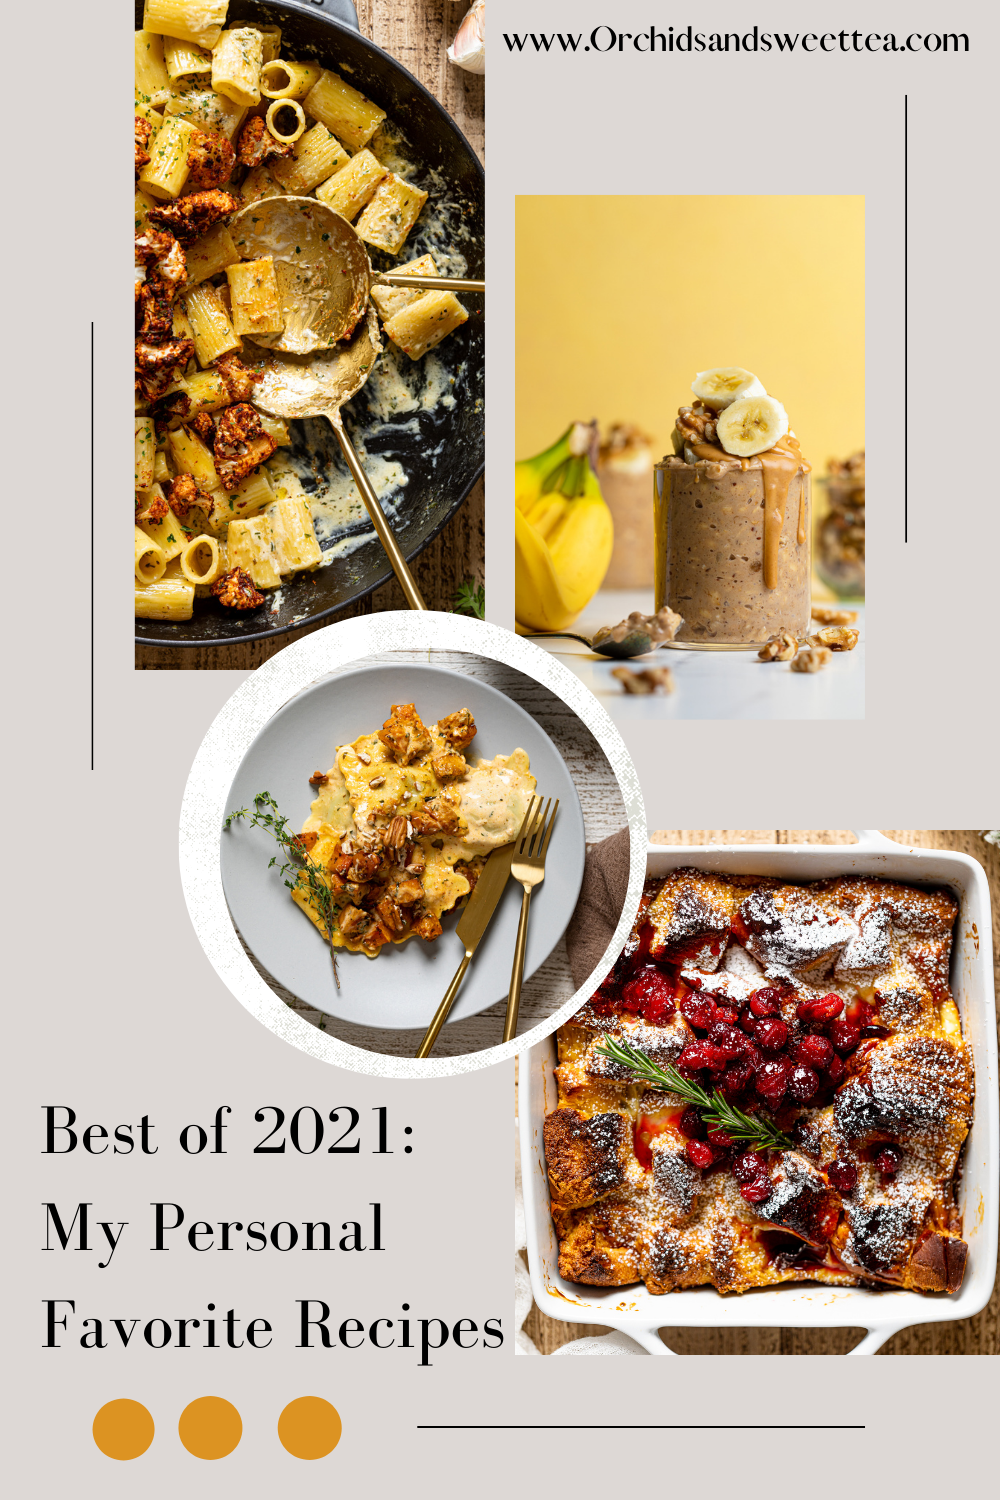 Best of 2021: My Personal Favorite Recipes